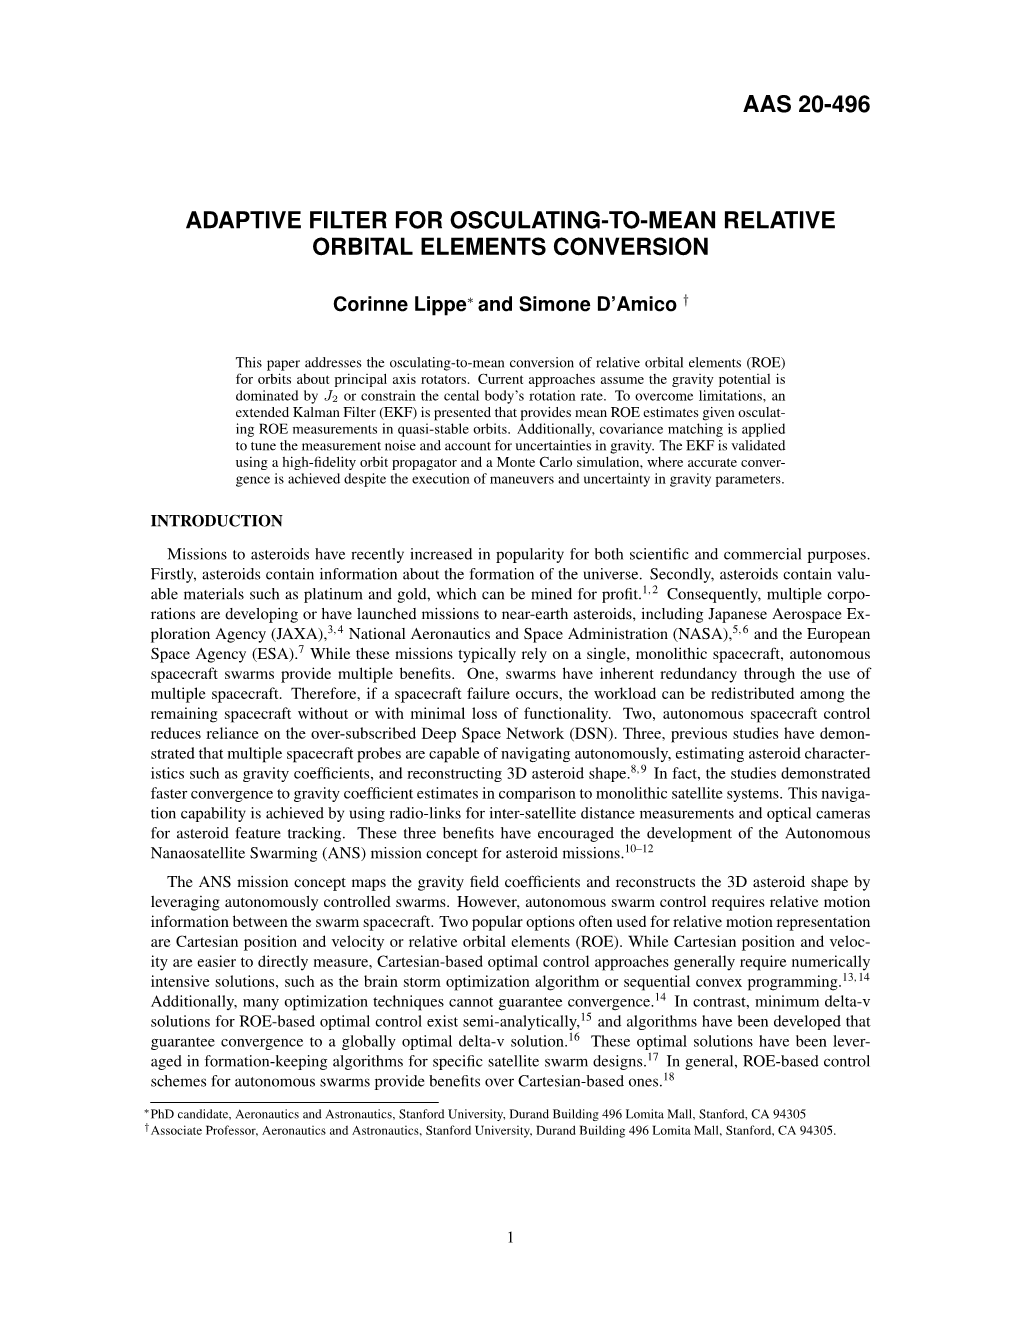 Adaptive Filter for Osculating-To-Mean Relative Orbital Elements Conversion